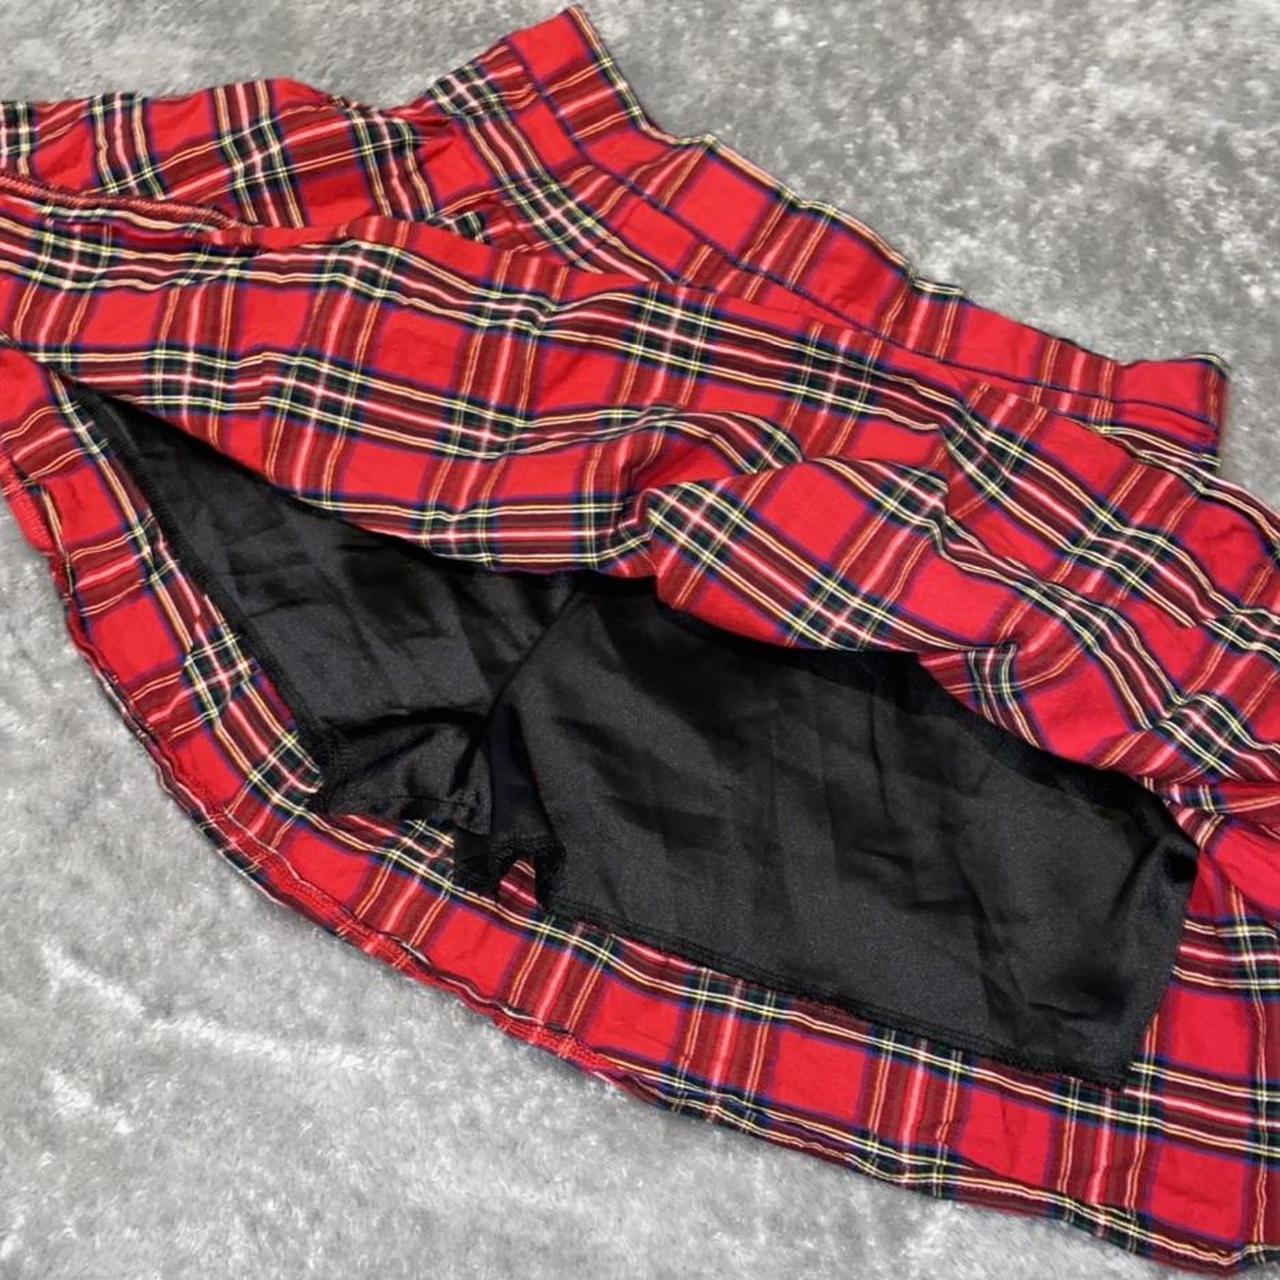 Plaid school girl mini skirt with attached shorts - Depop